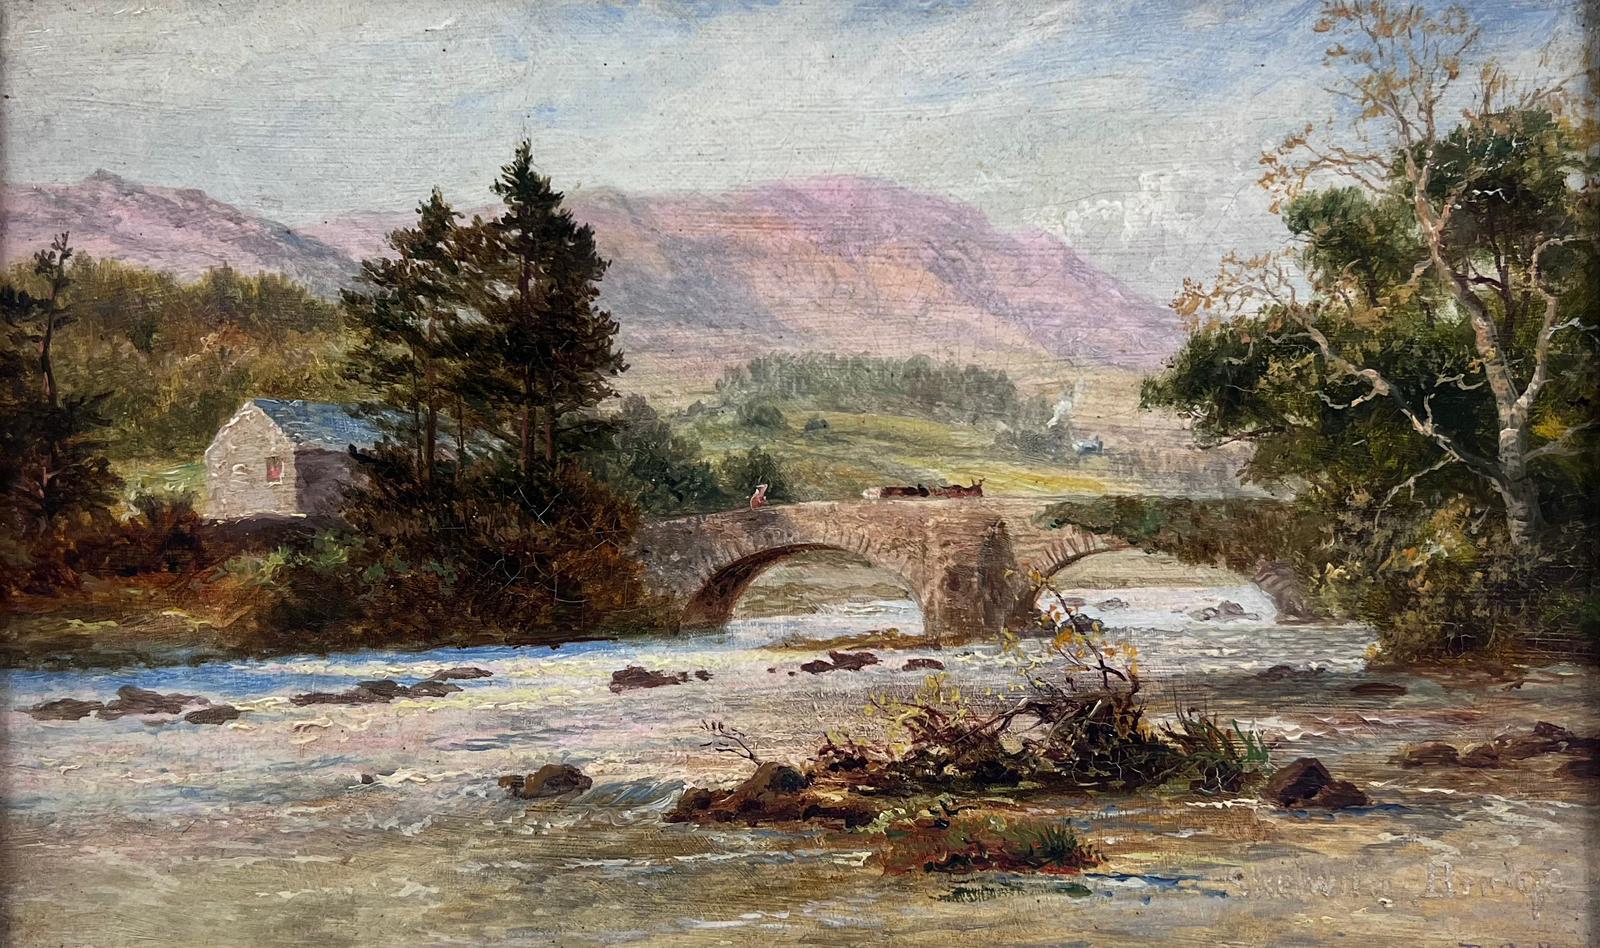 Antique Scottish Signed Oil Painting Cattle over Stone Bridge Highland River - Brown Landscape Painting by Scottish School